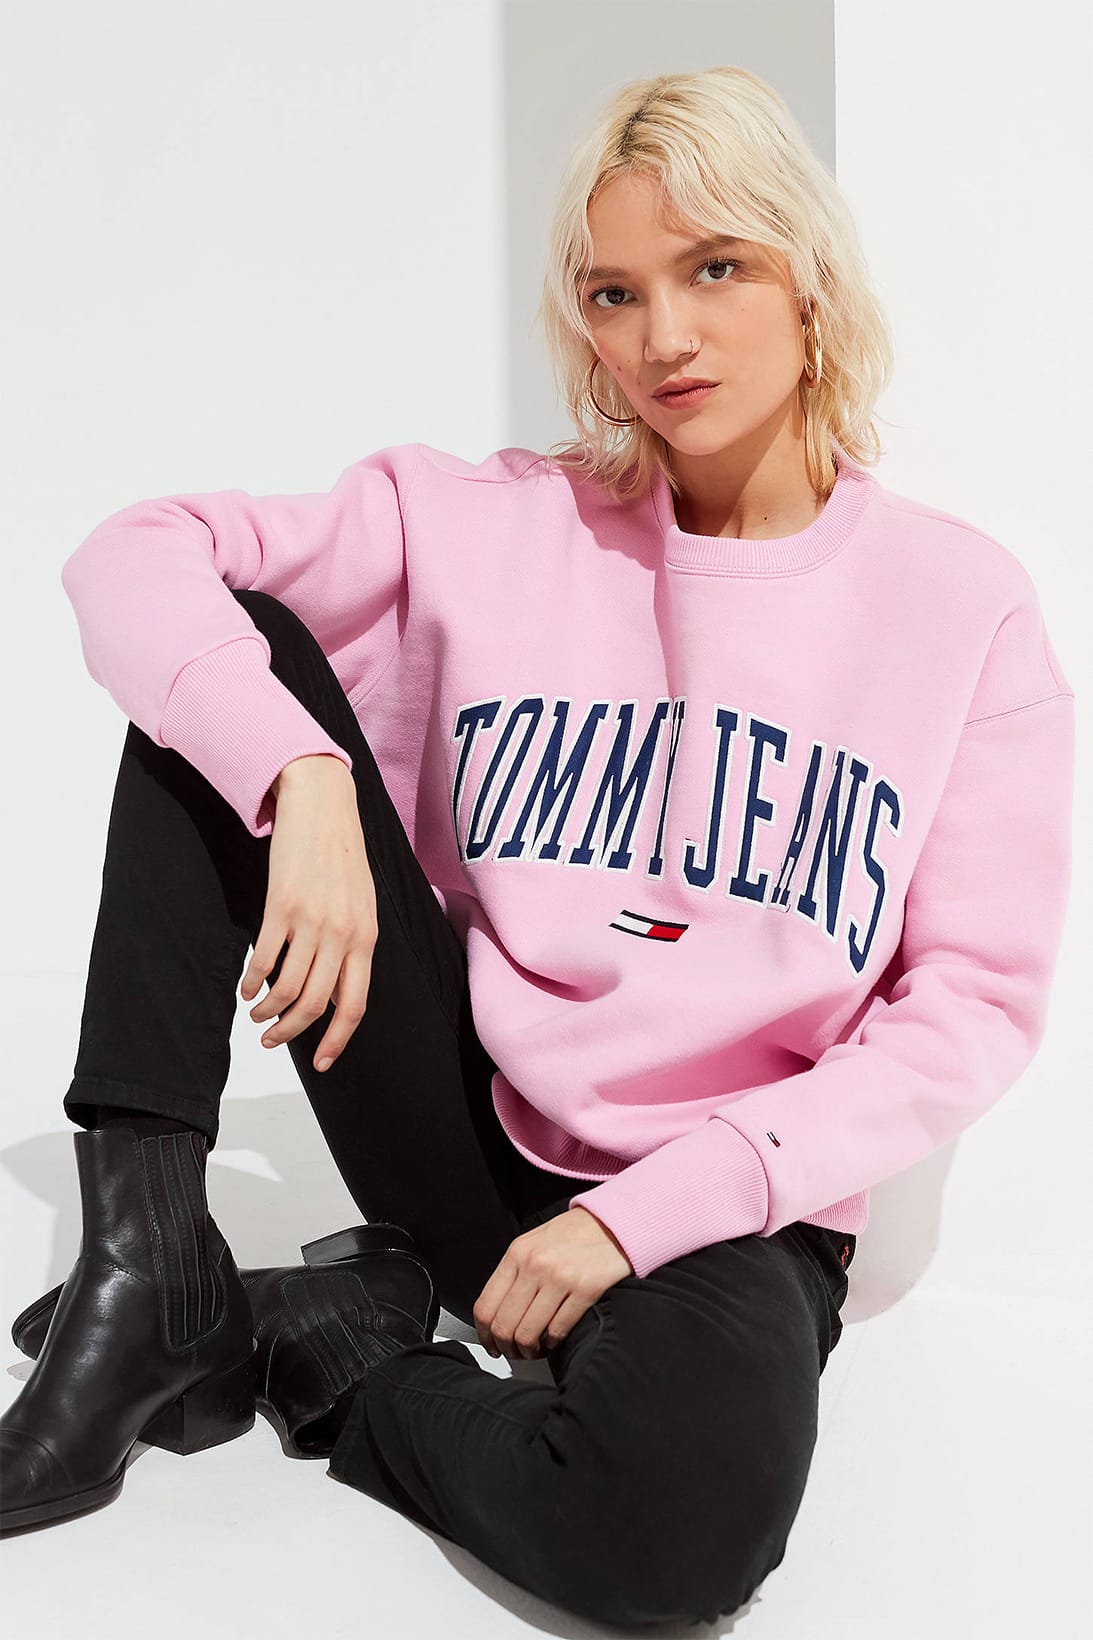 Tommy Jeans Femme Contrast Piping Sweater Sweat-Shirt